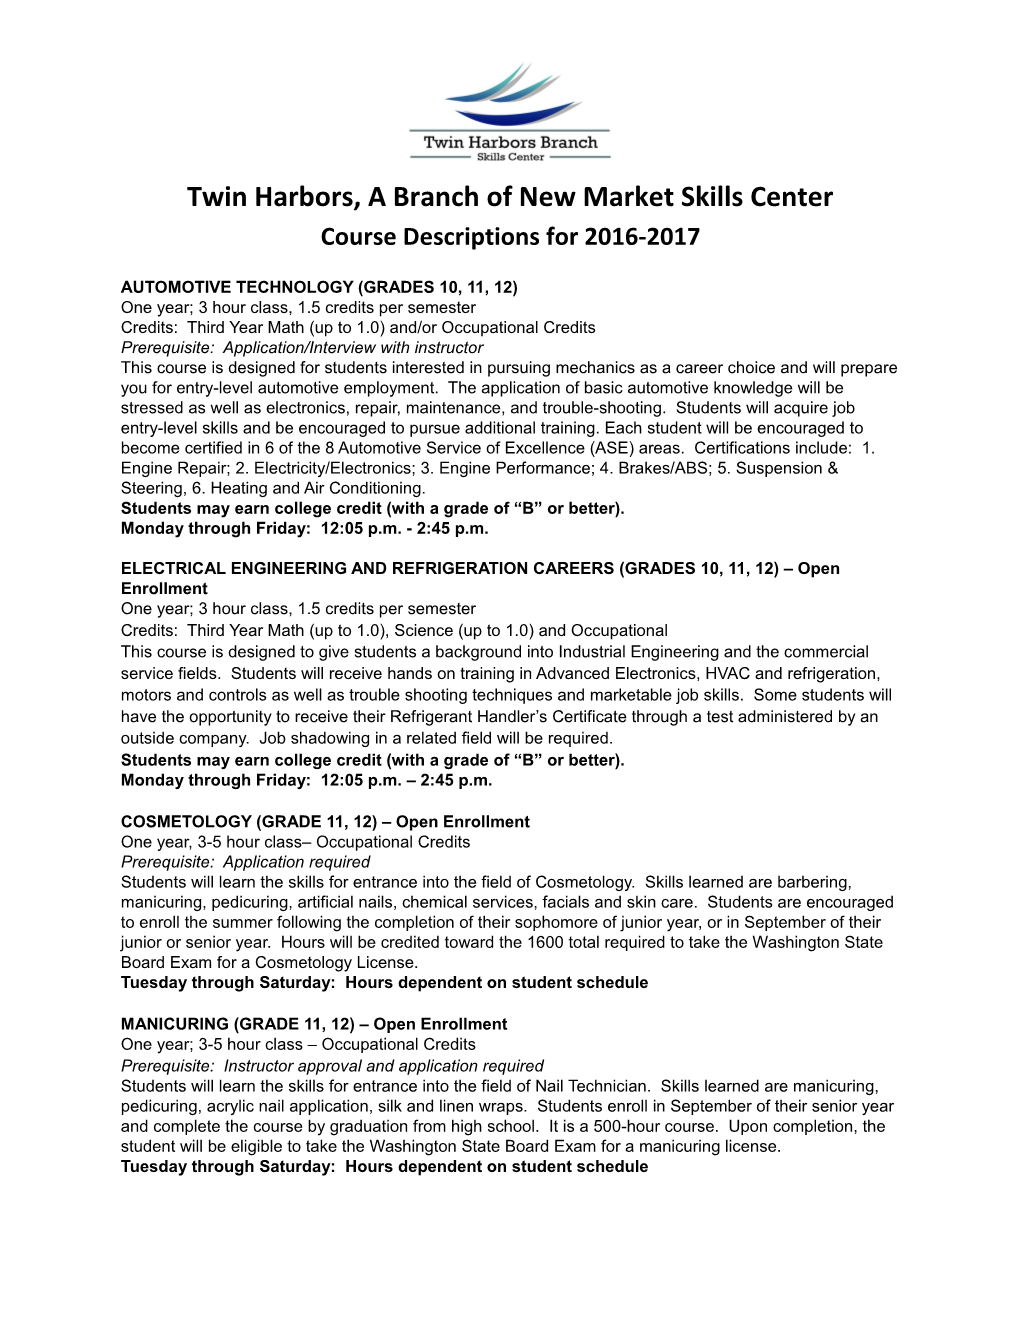 Twin Harbors, a Branch of New Market Skills Center